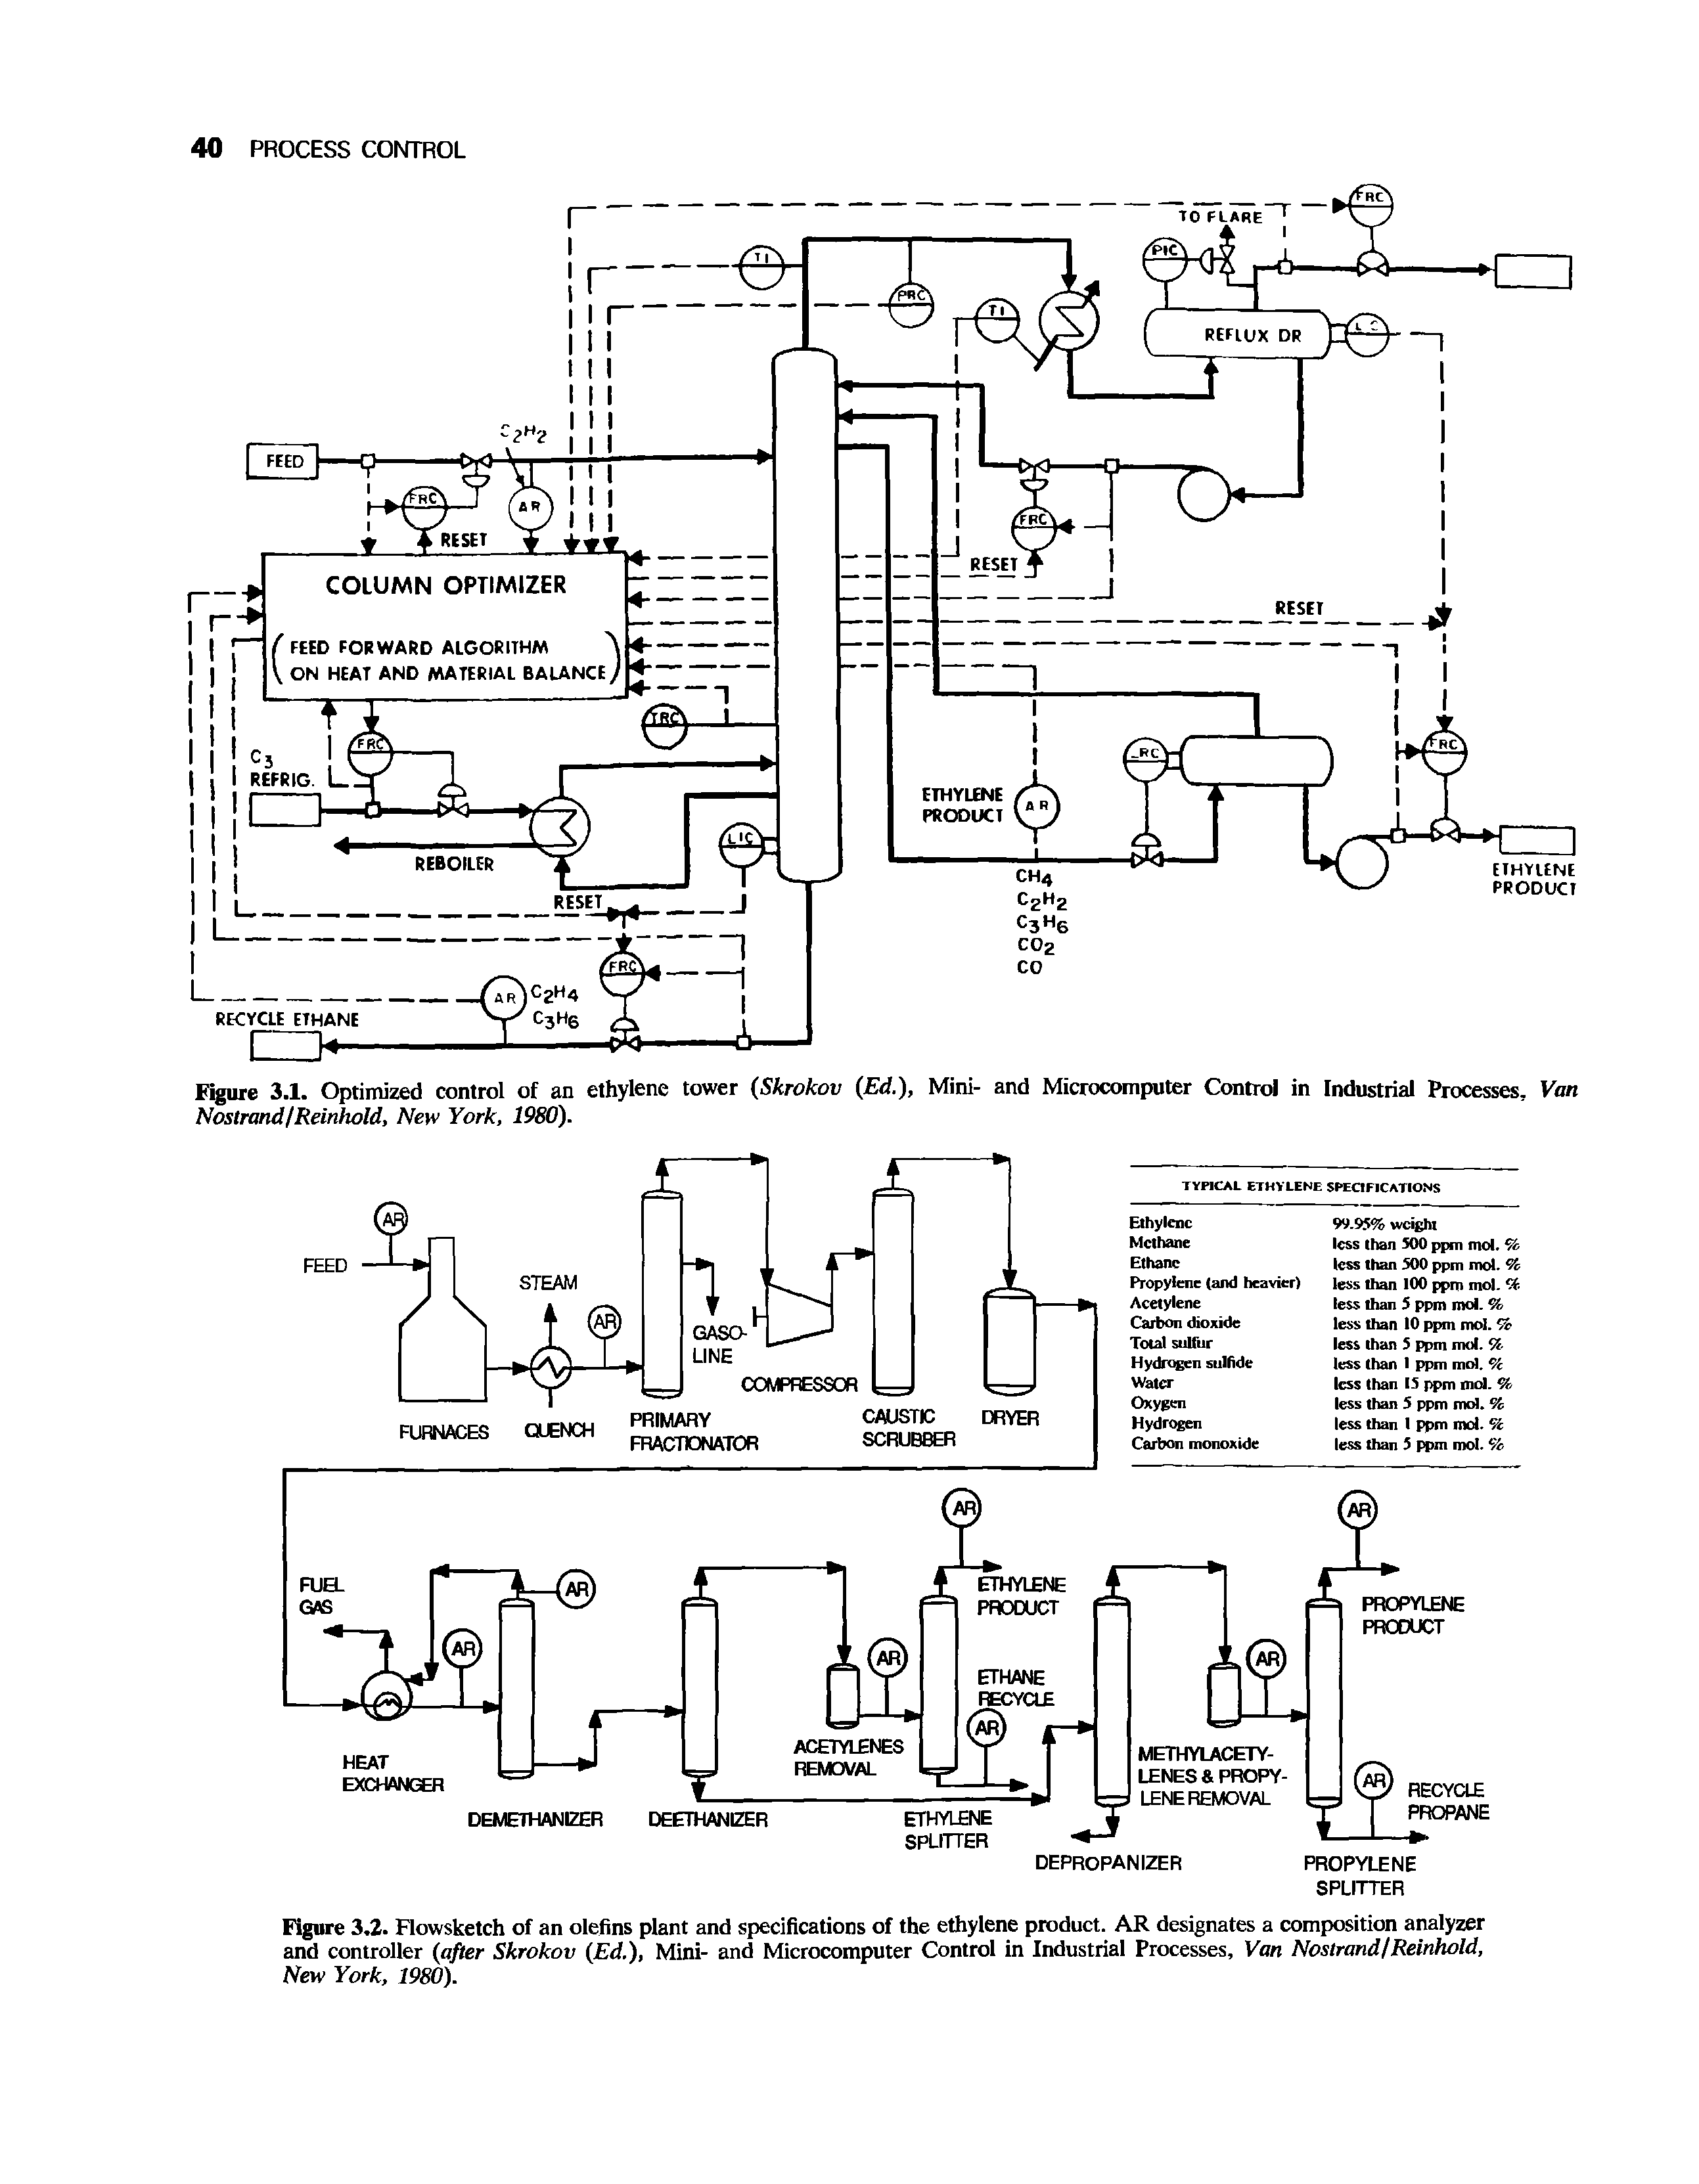 Figure 3.2. Flowsketch of an olefins plant and specifications of the ethylene product. AR designates a composition analyzer and controller (after Skrokov (Ed.), Mini- and Microcomputer Control in Industrial Processes, Van Nostrand I Reinhold, New York, 1980).